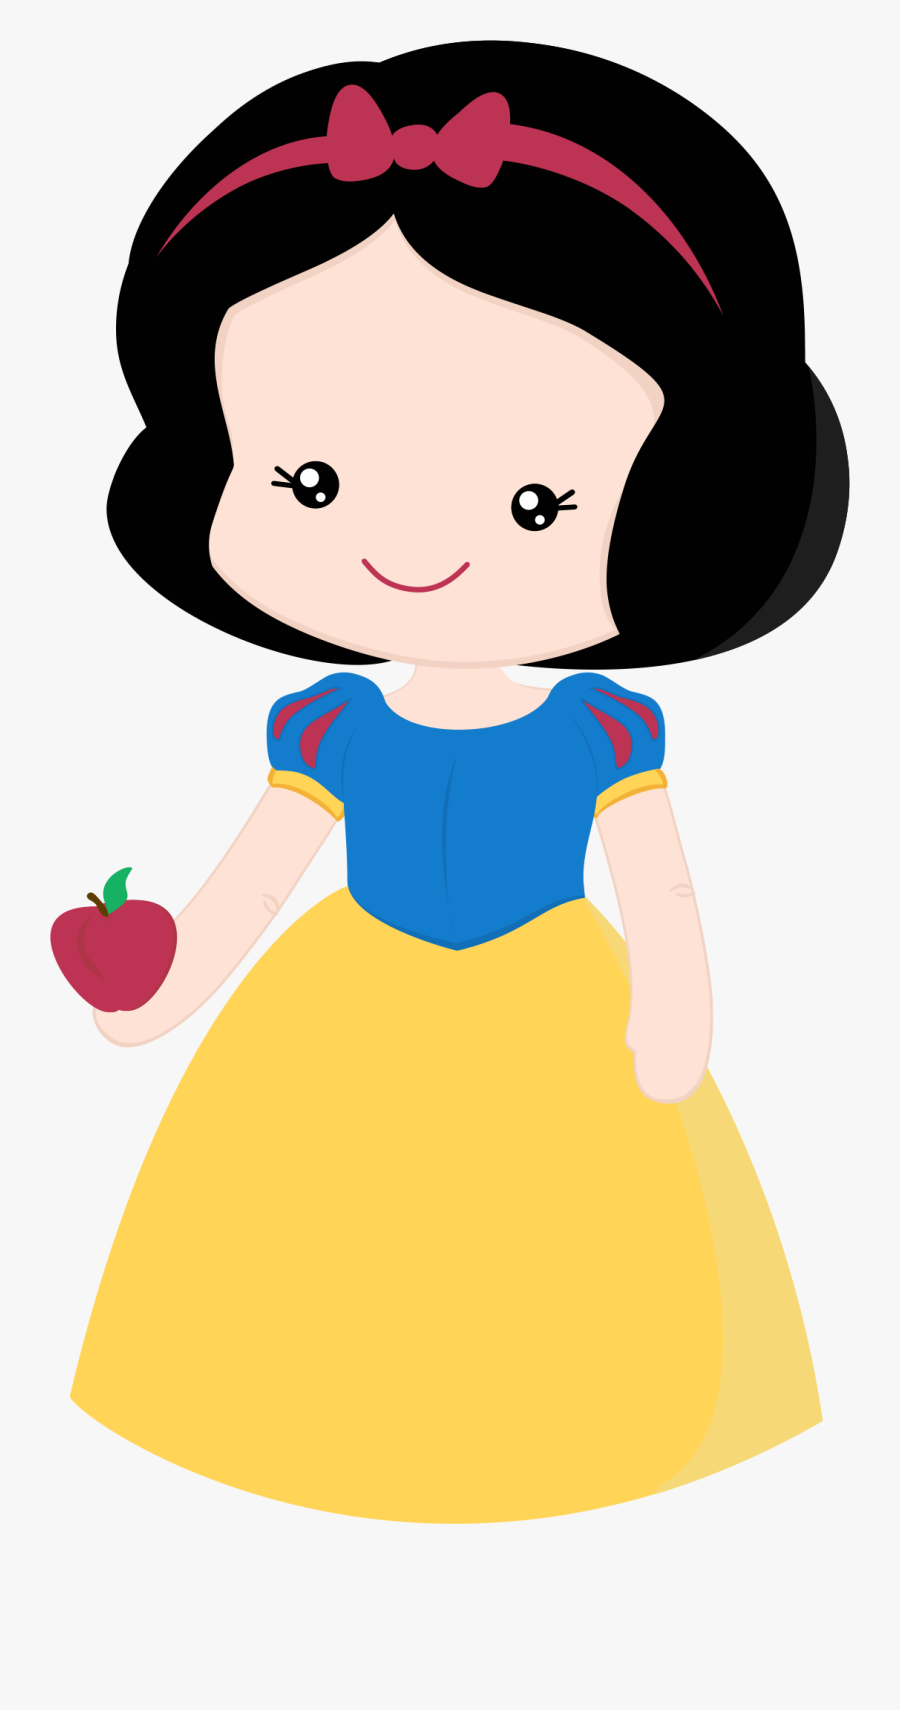 Snow White Clipart To Free Download - Cute Snow White Clipart, Transparent Clipart